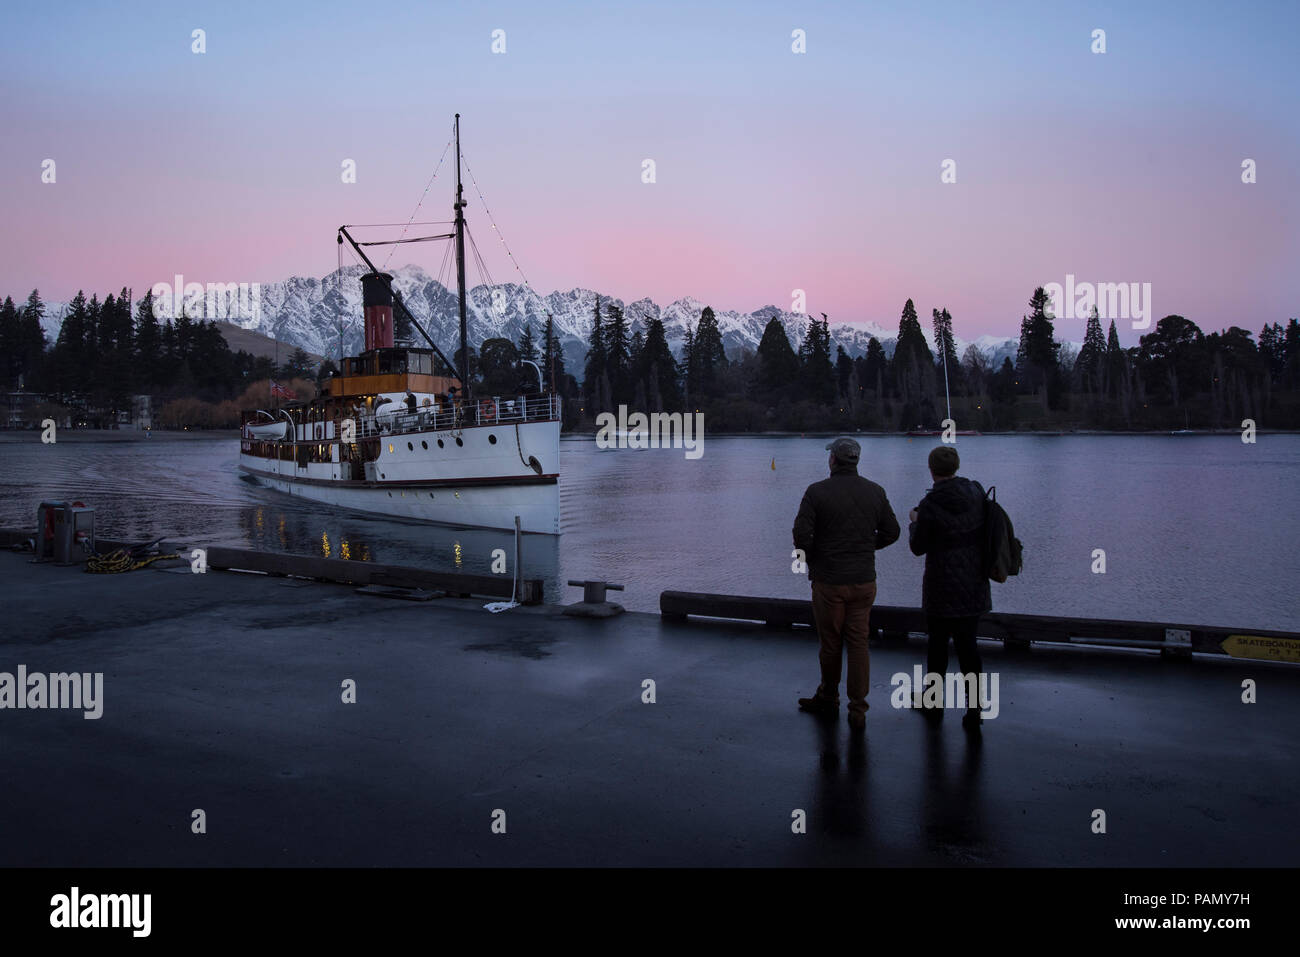 Two people waiting for the steam boat in front of a purple winter sunset, in Lake Wakatipu, Queenstown. Stock Photo